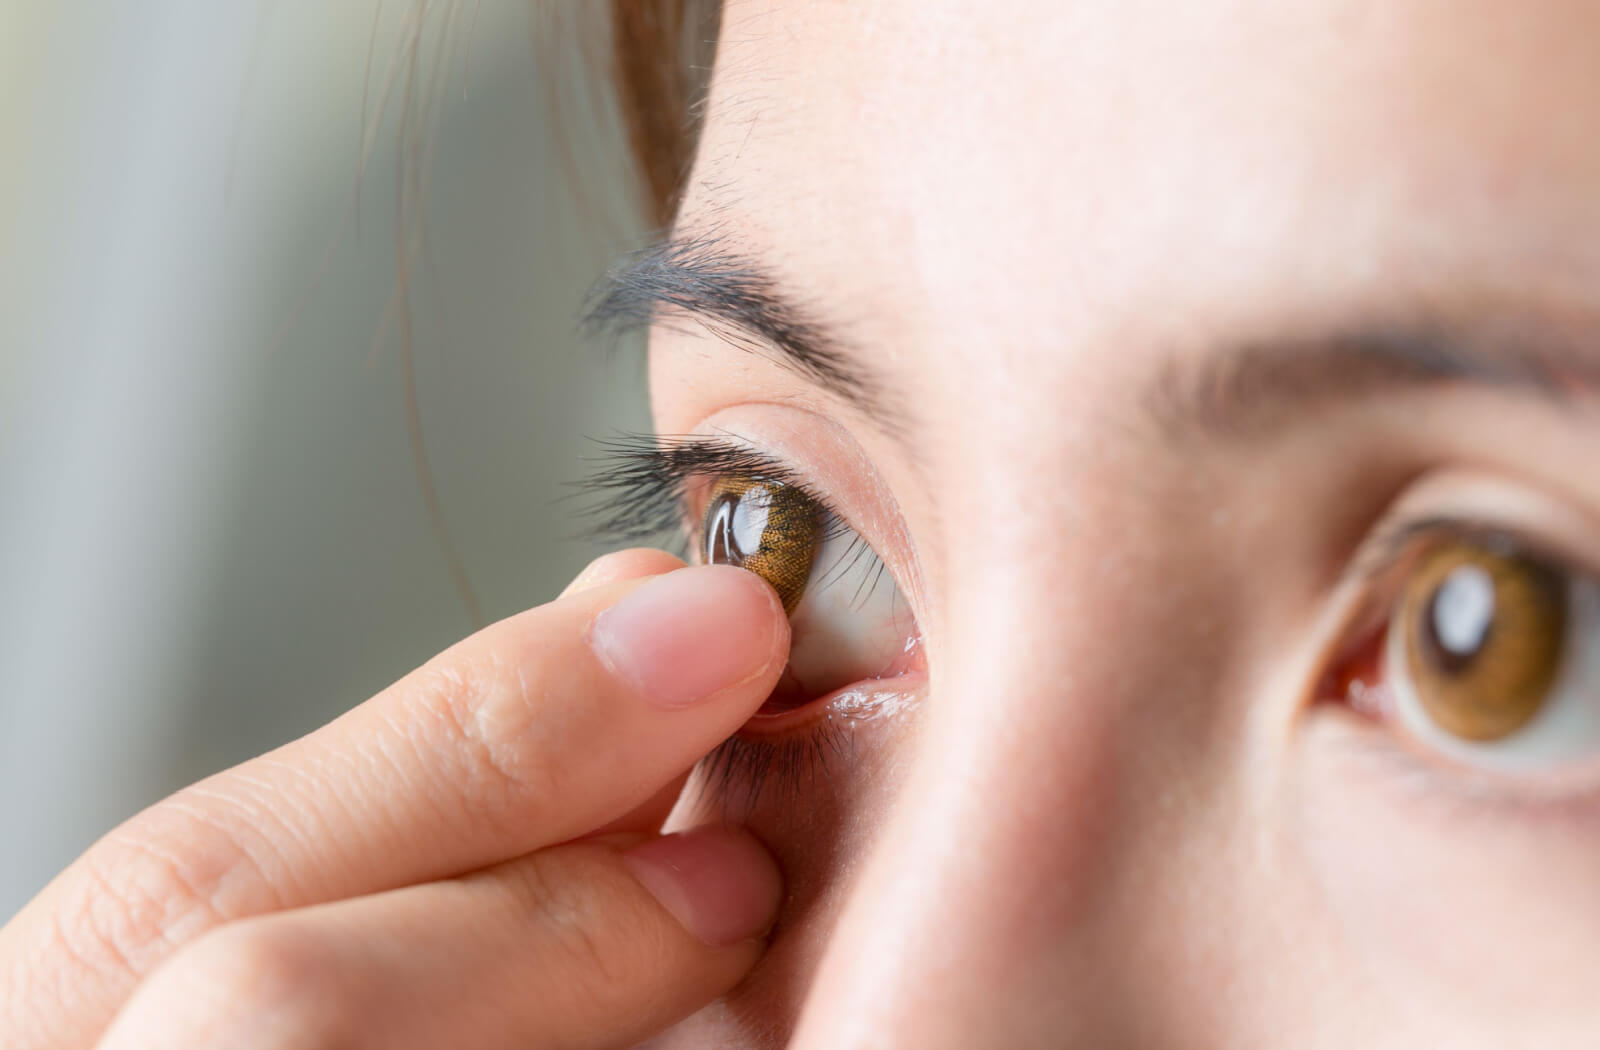 A close-up shot of a young woman removing her contact lenses before sleeping.